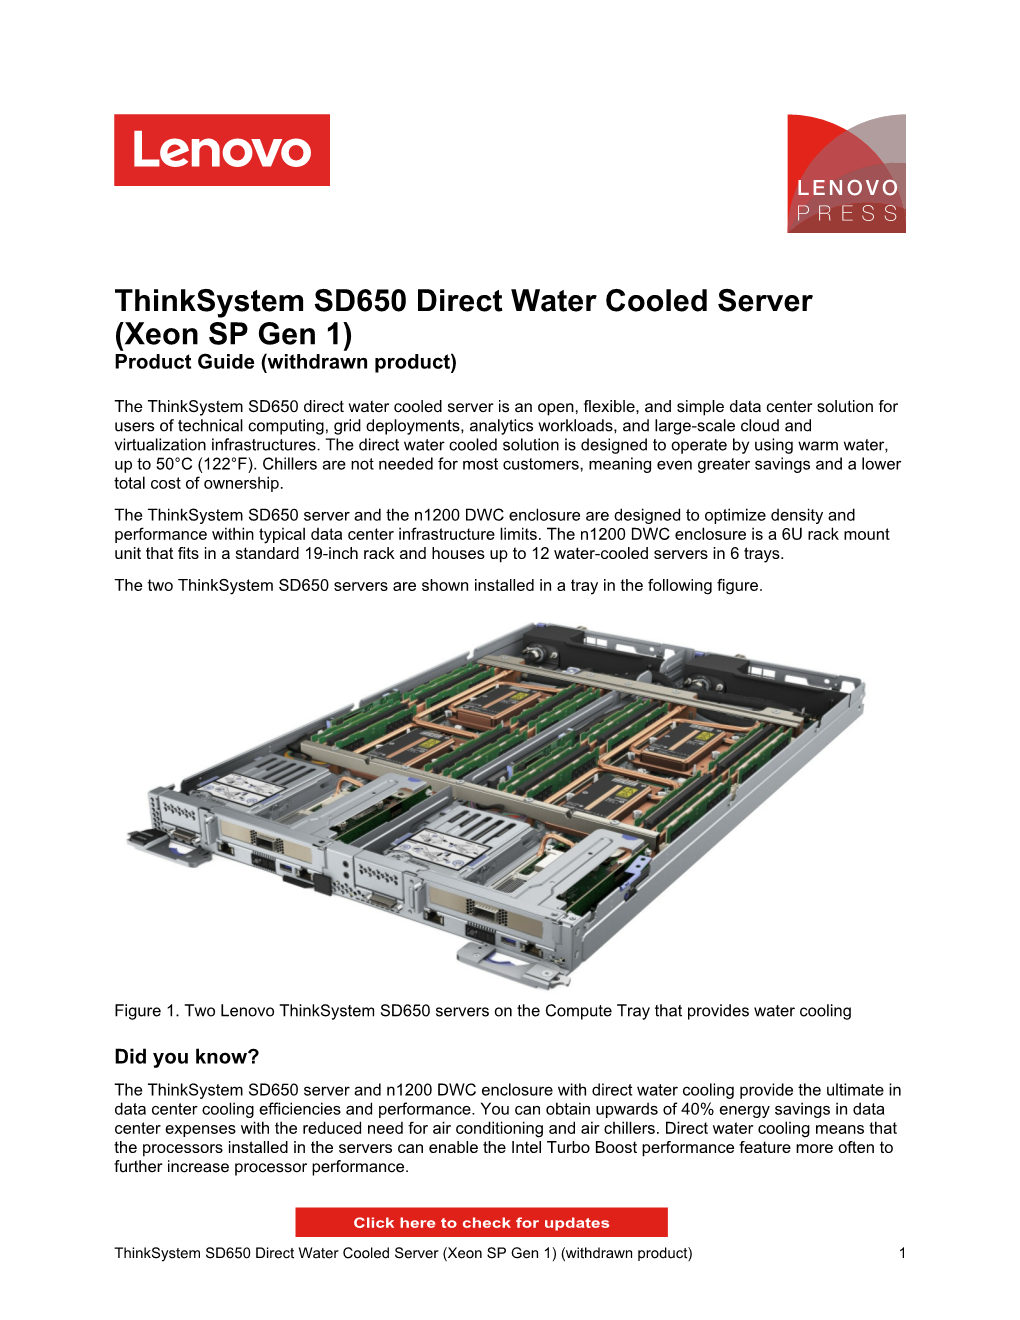 Thinksystem SD650 Direct Water Cooled Server (Xeon SP Gen 1) Product Guide (Withdrawn Product)